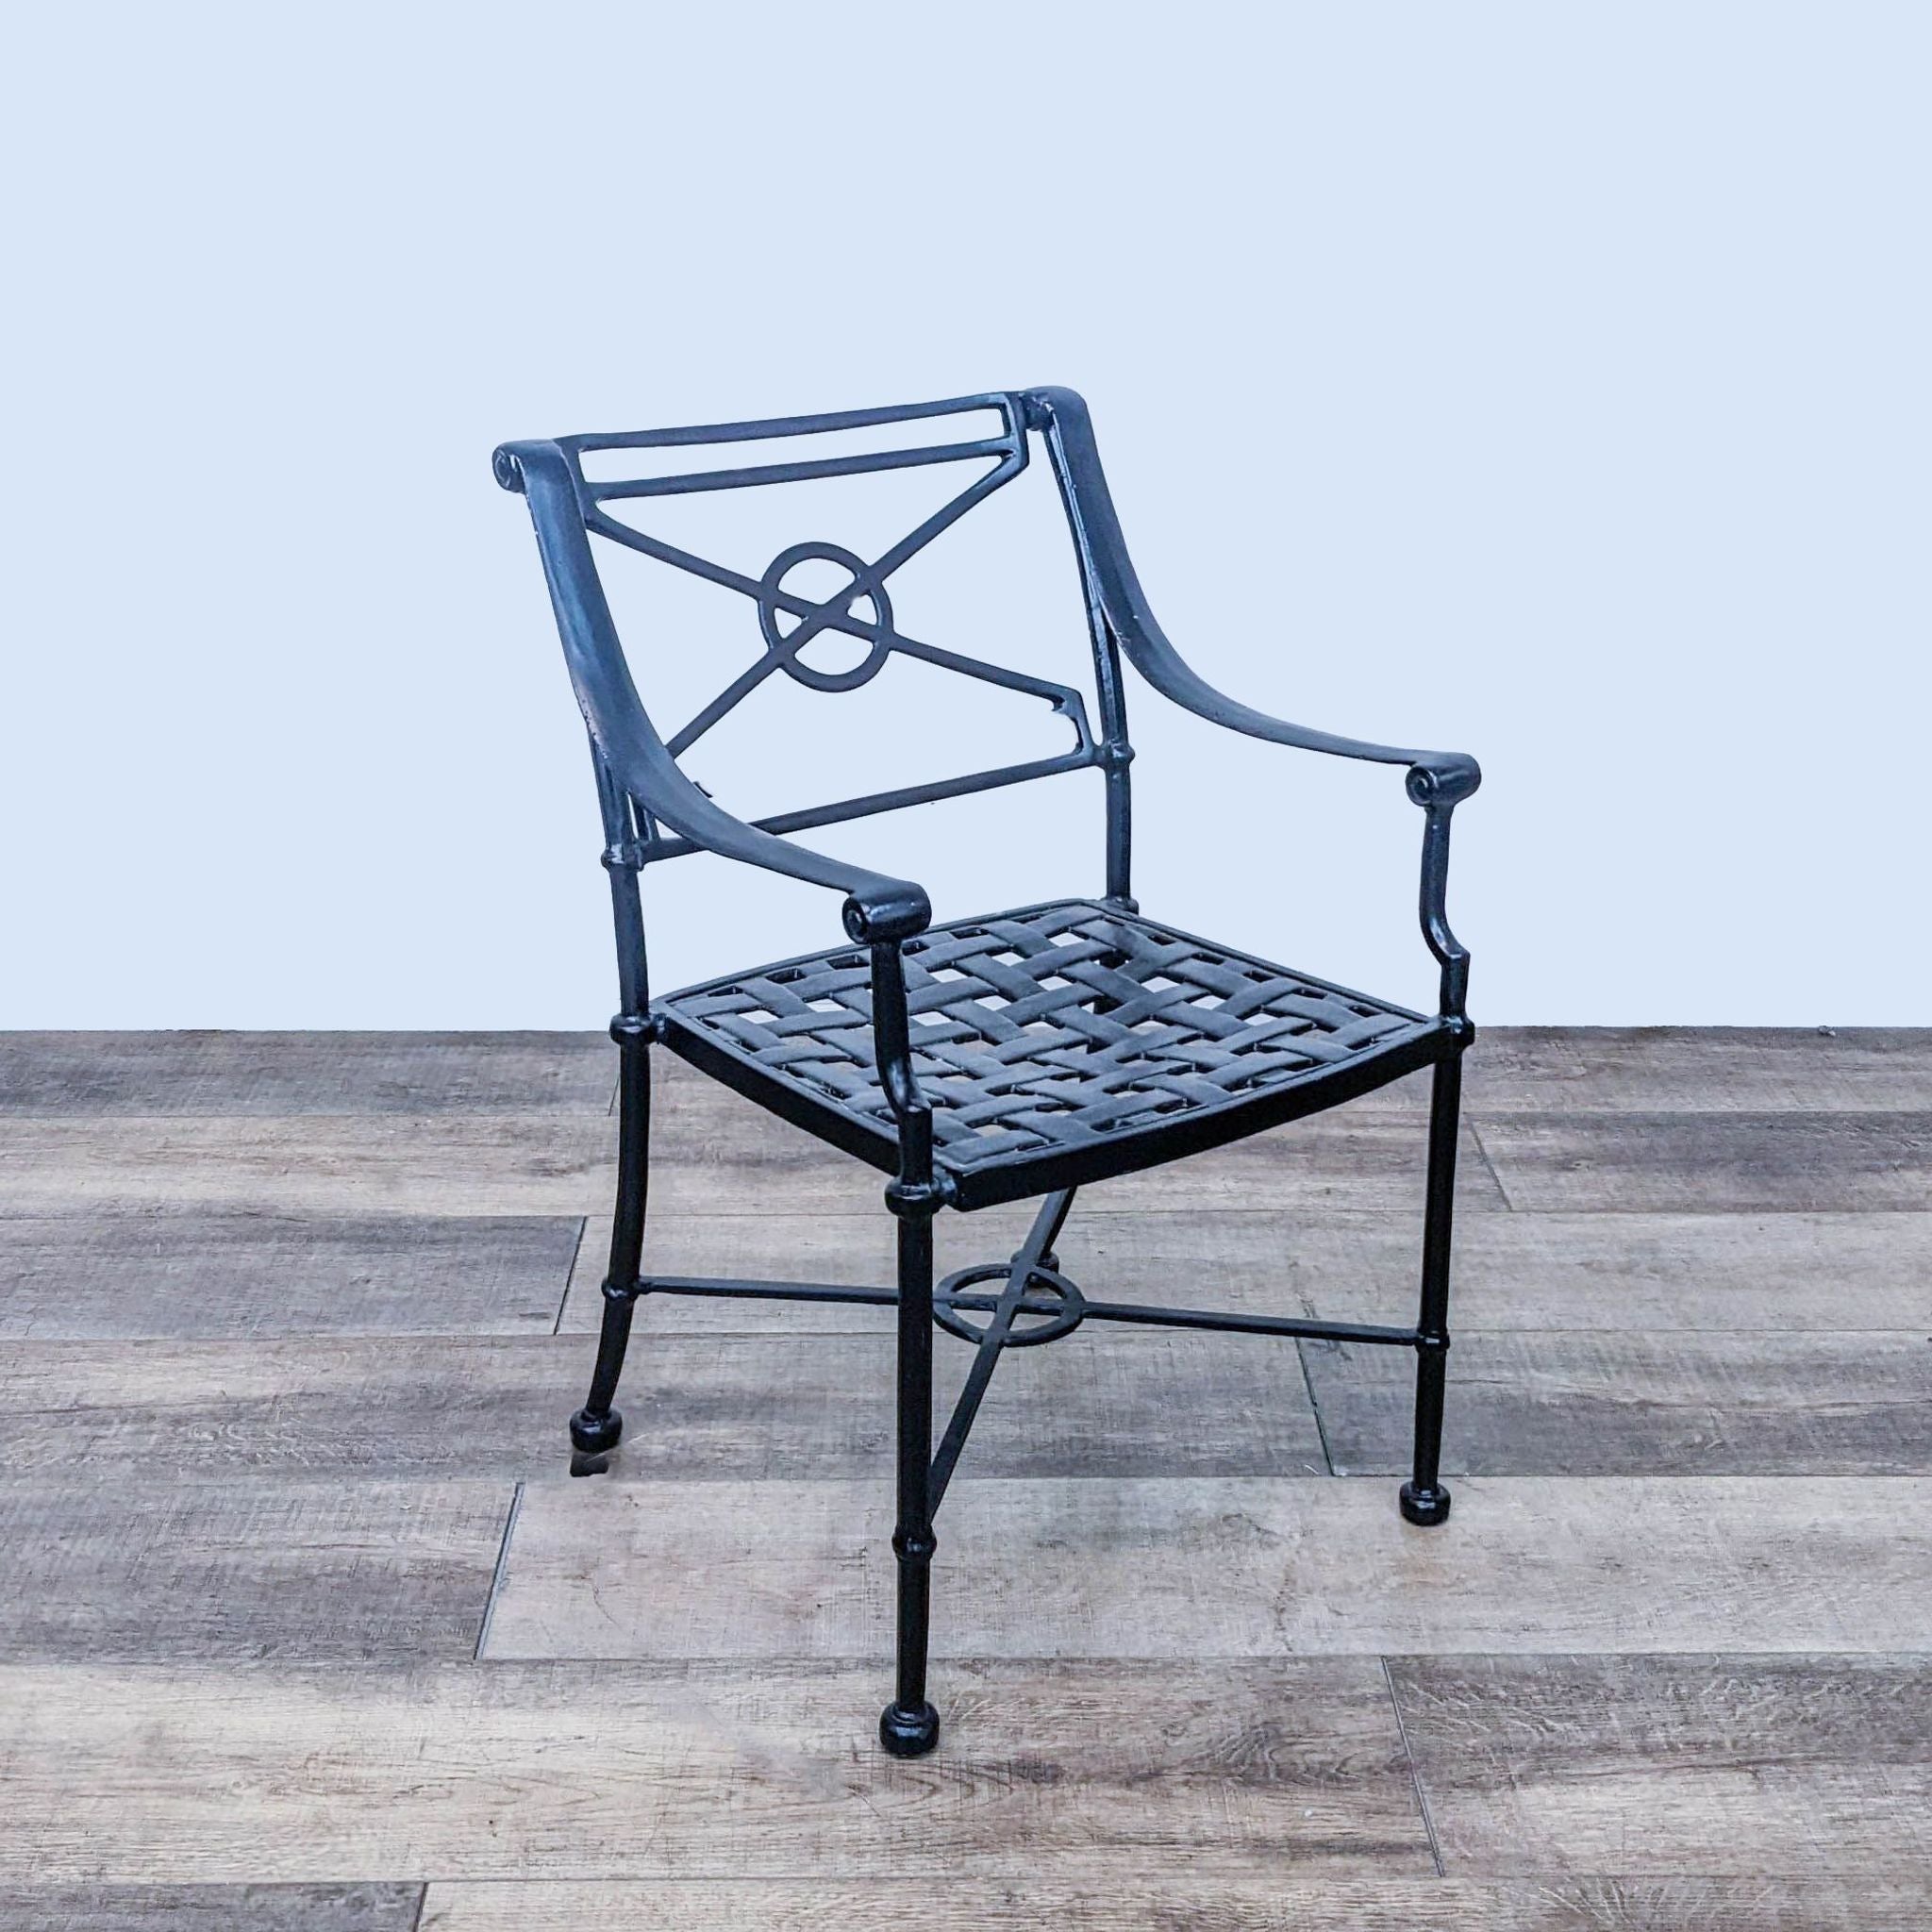 Powder-coated Reperch classic chair featuring circle backrest design and interwoven seat pattern, displayed on wooden flooring.